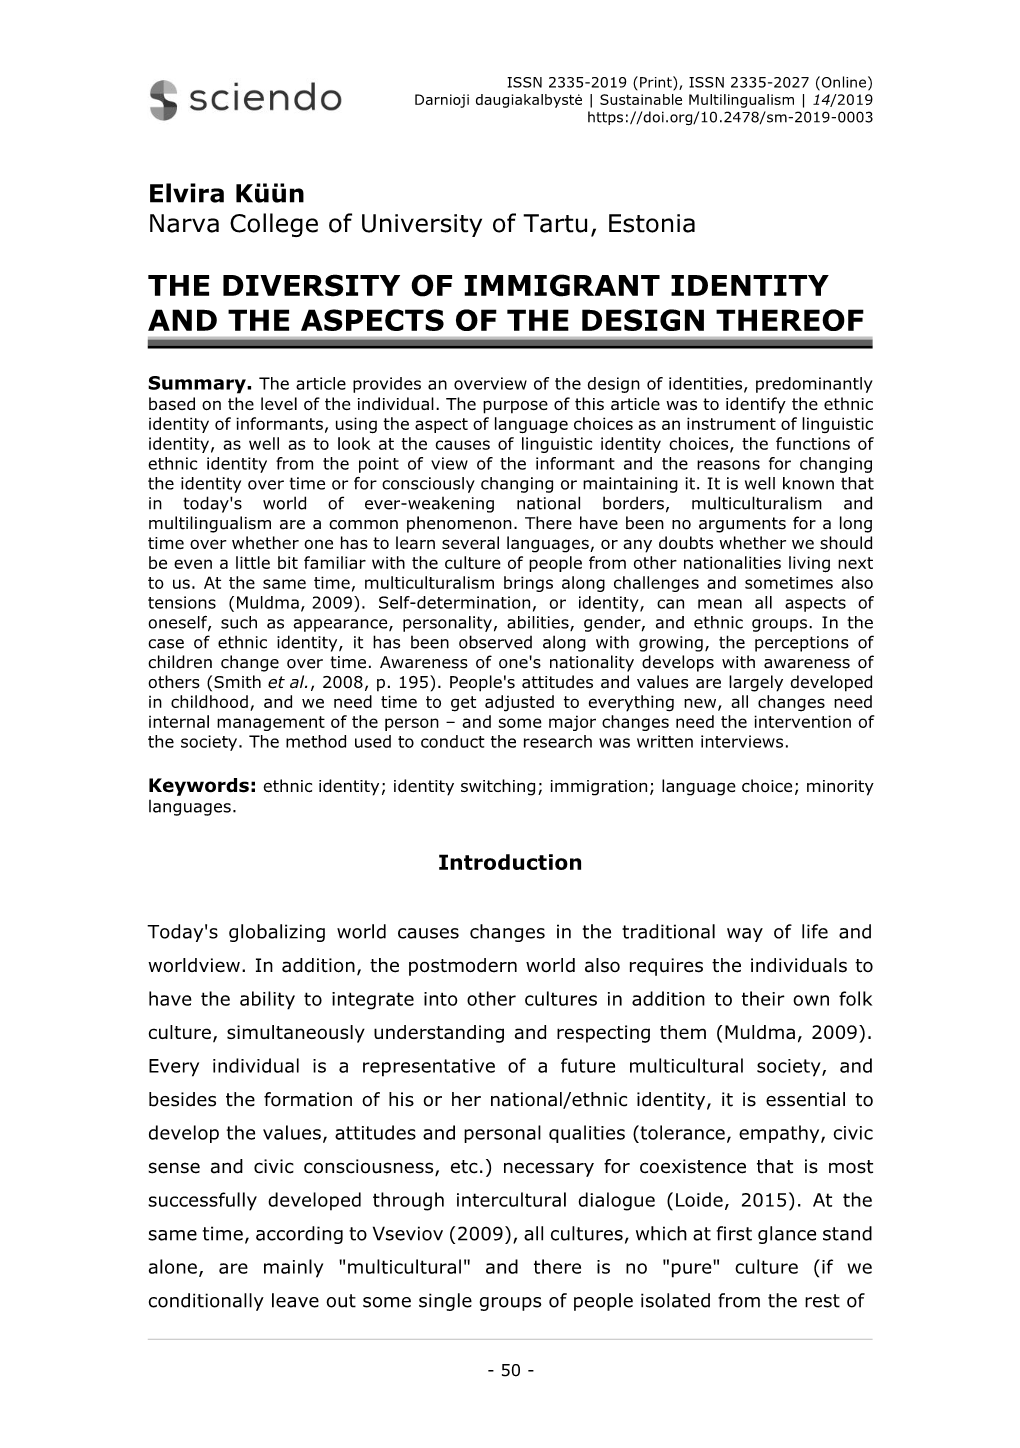 The Diversity of Immigrant Identity and the Aspects of the Design Thereof